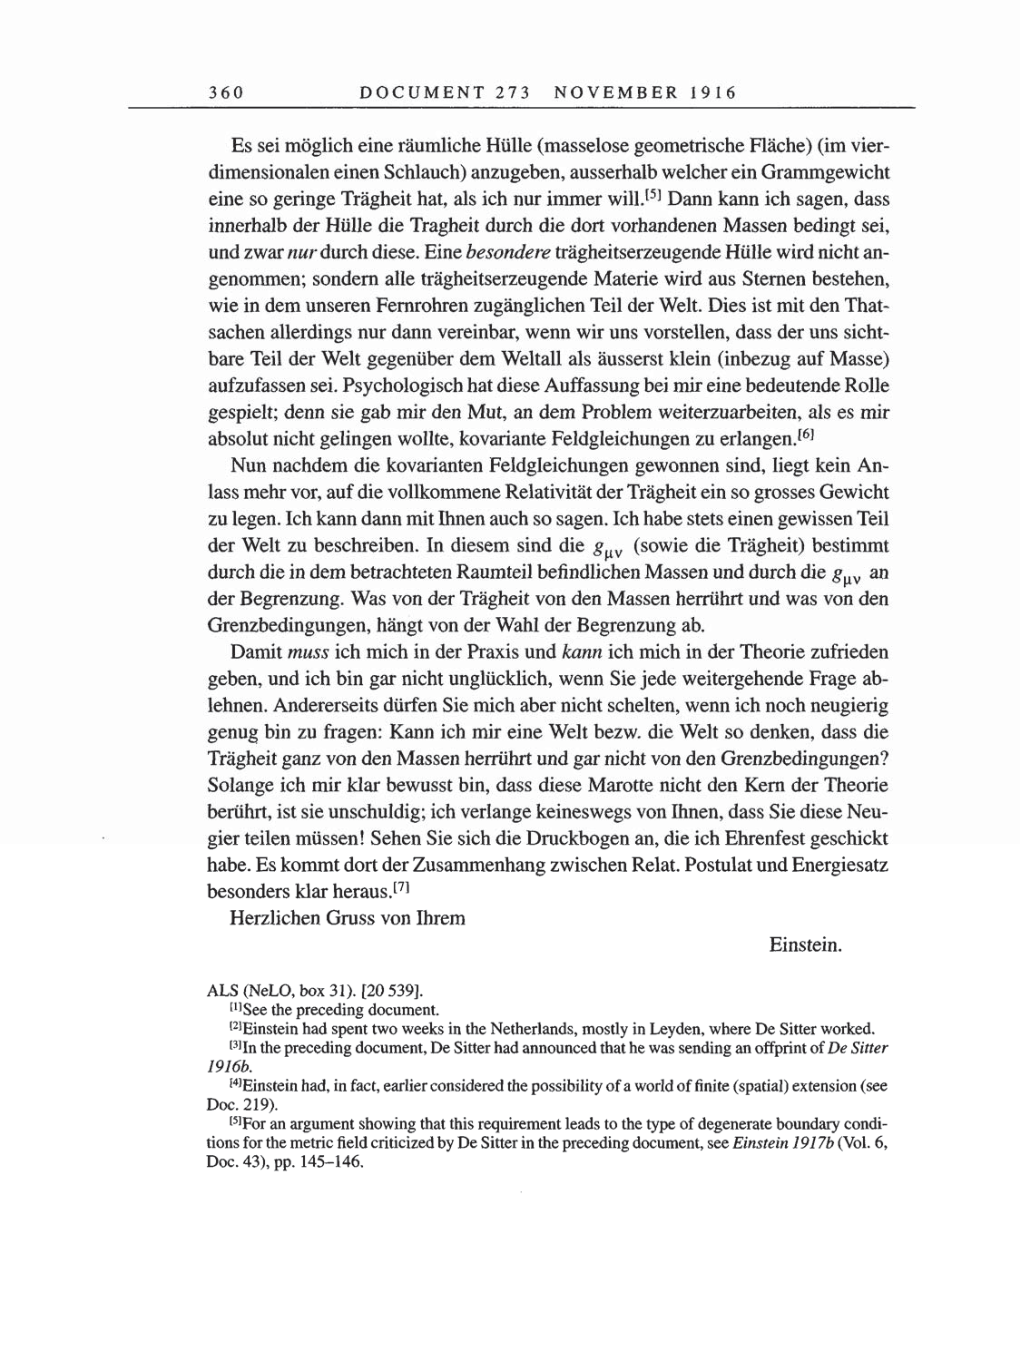 Volume 8, Part A: The Berlin Years: Correspondence 1914-1917 page 360